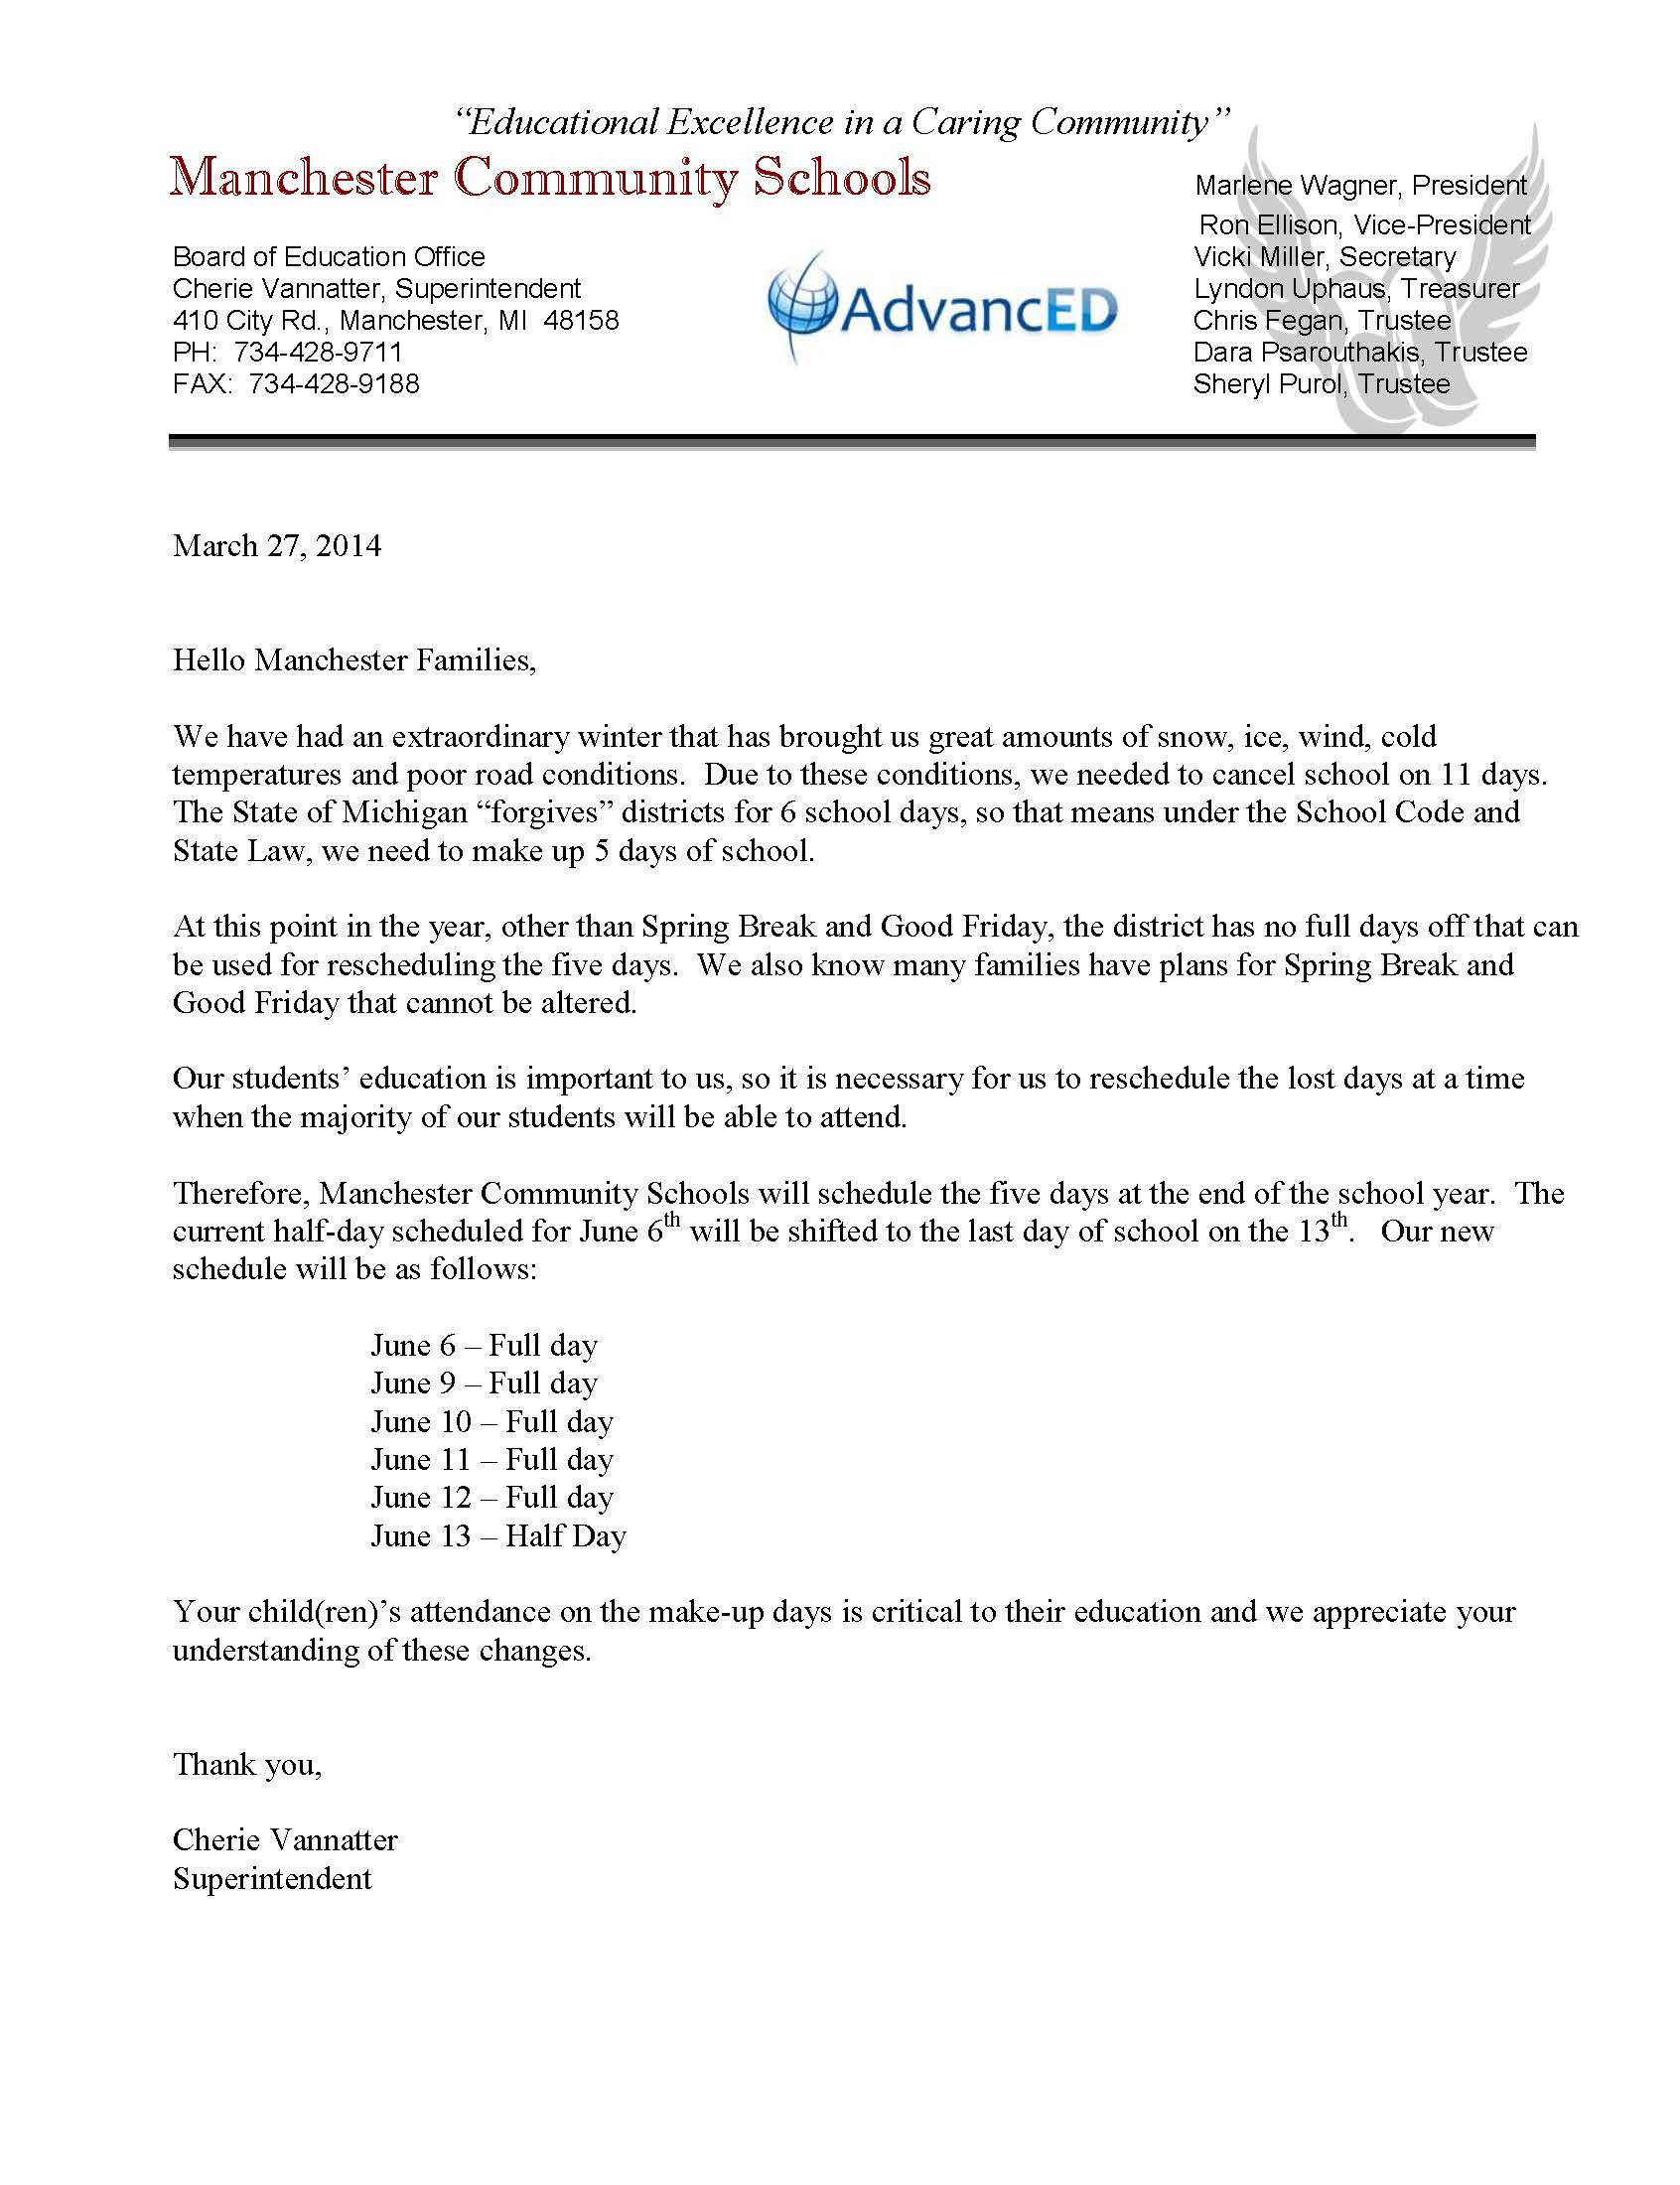 attendance-letter-to-parents-template